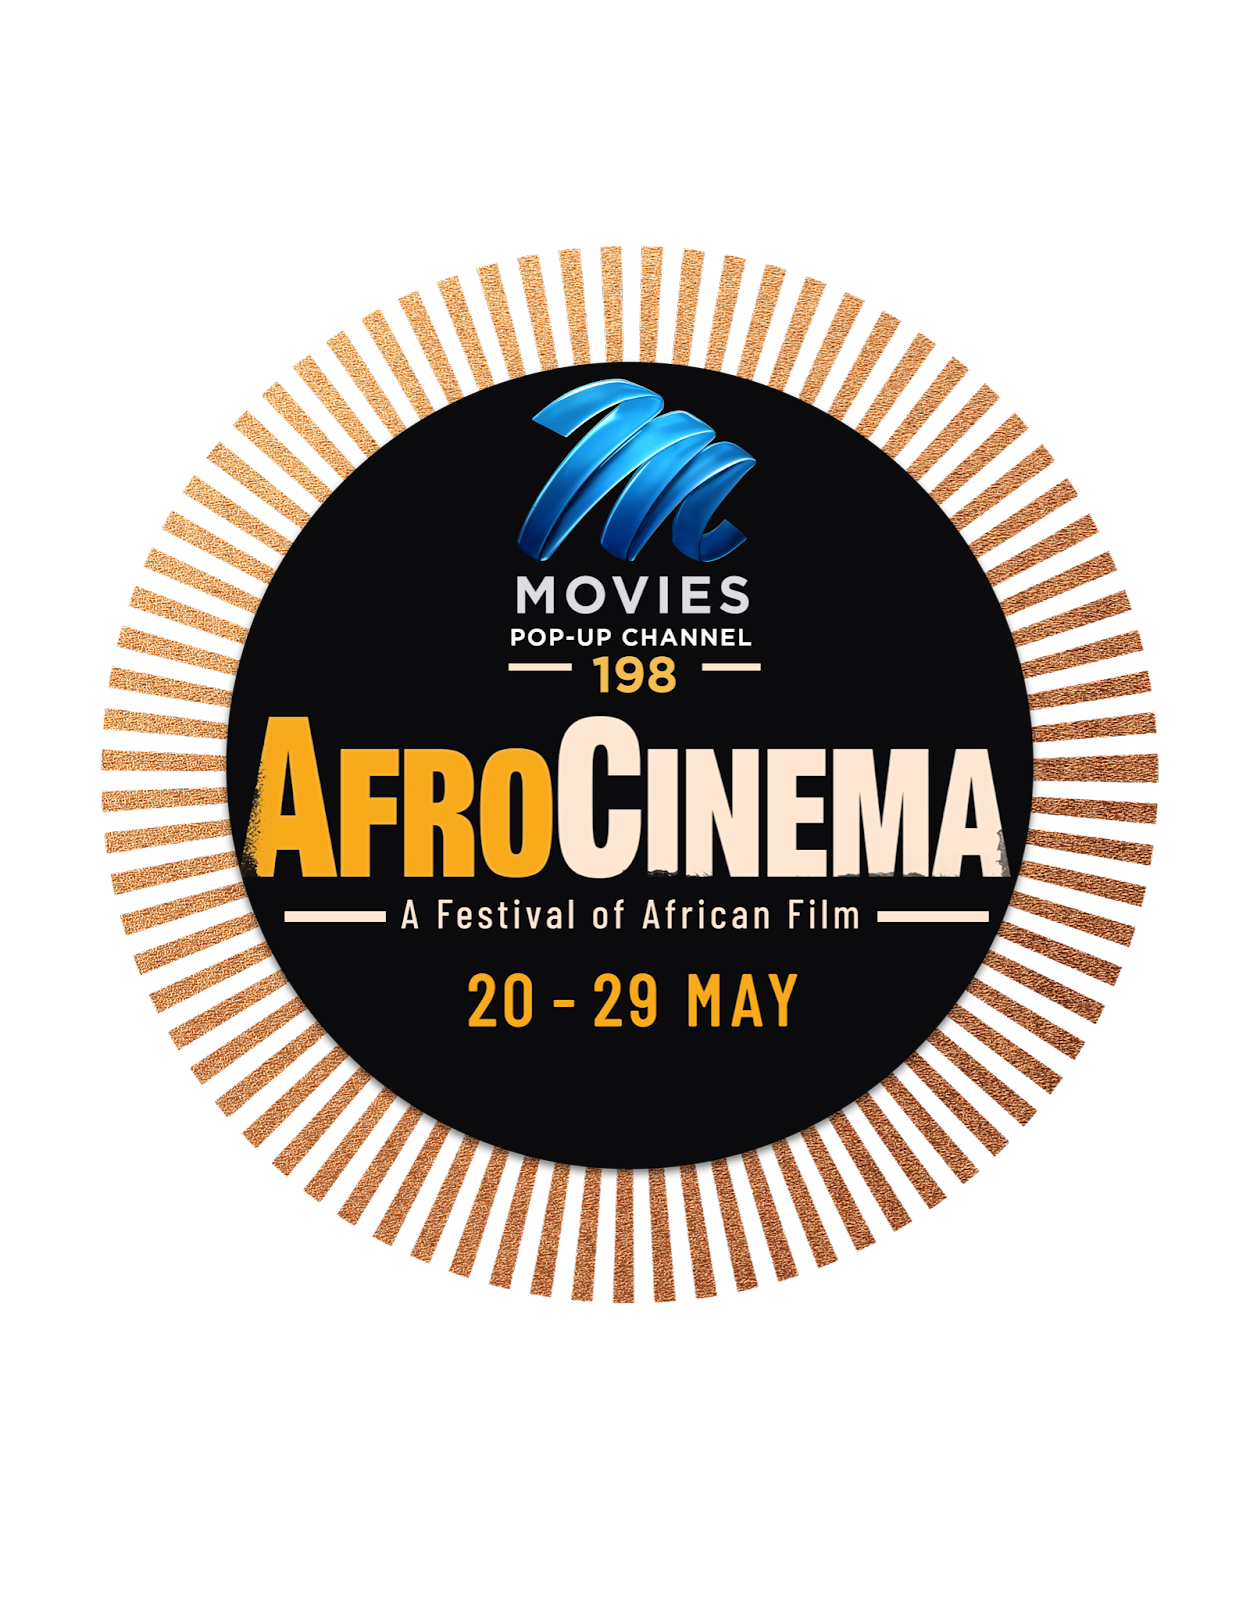 M-Net Movies celebrates Africa Day with AfroCinema Pop-Up Channel This Month On DStv, SiliconNigeria